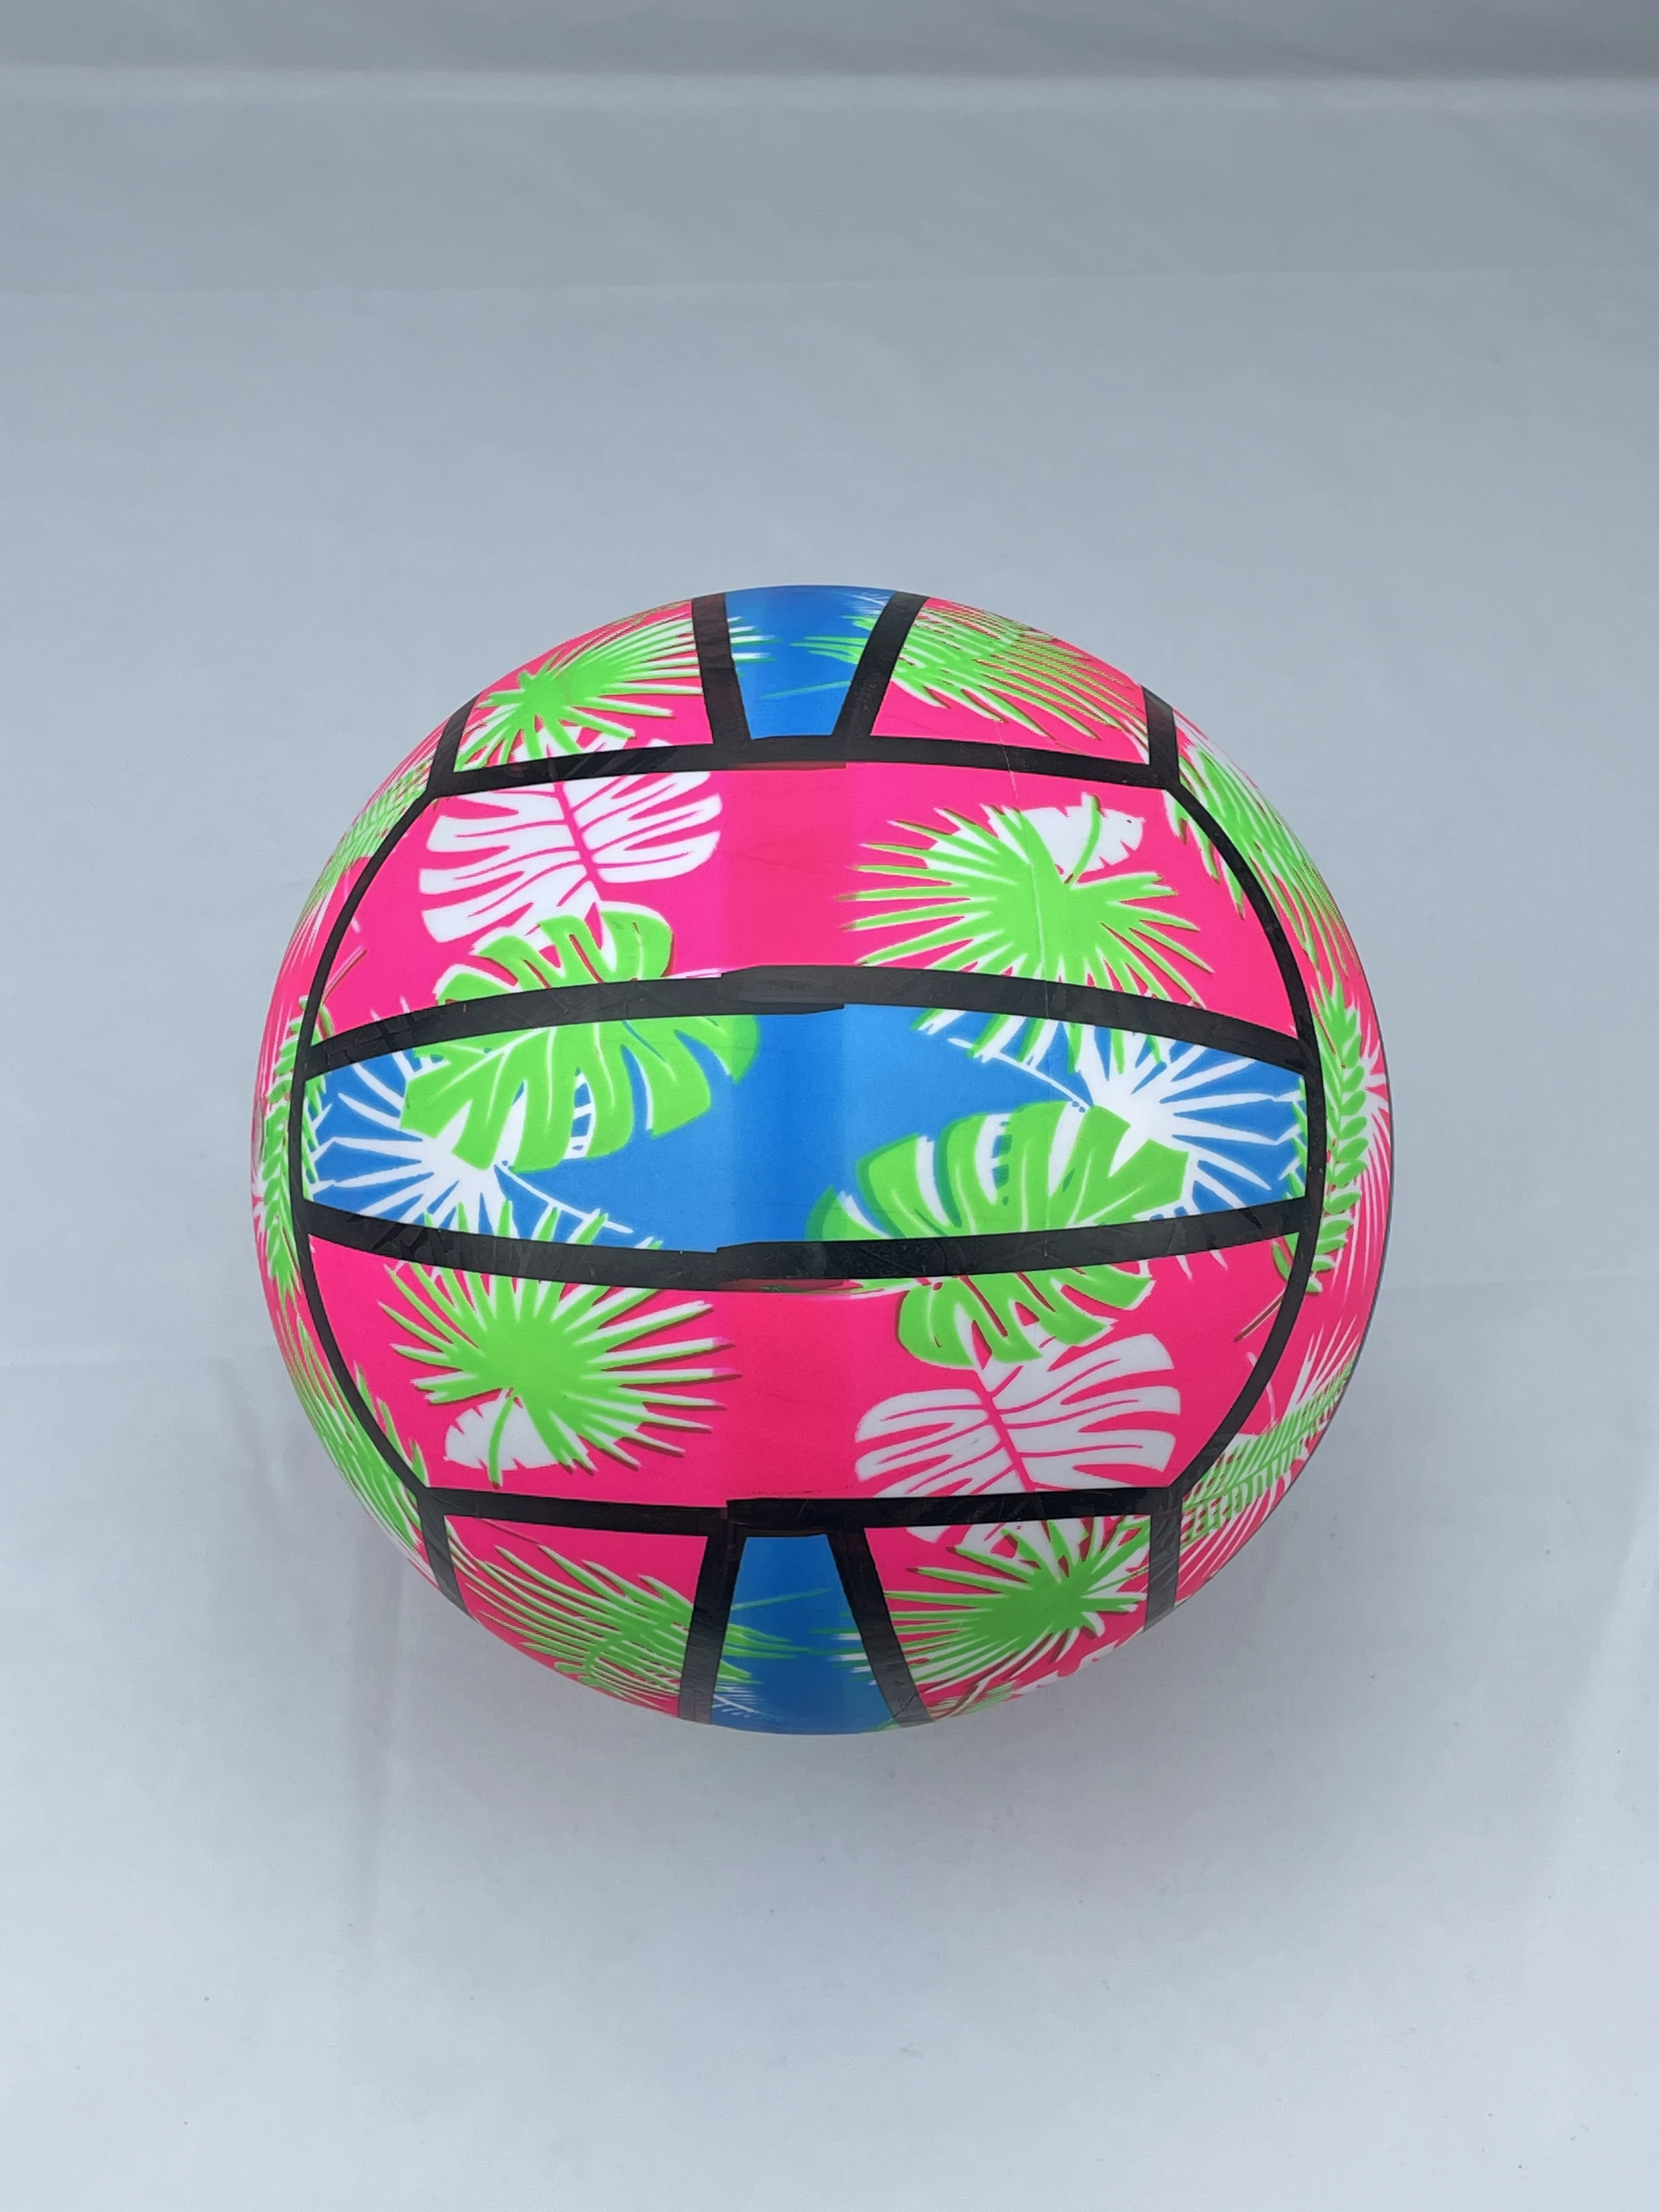 2021 Hot Sale Promotional Outdoor Pvc Beach Balls Inflatable Beach Volley Ball